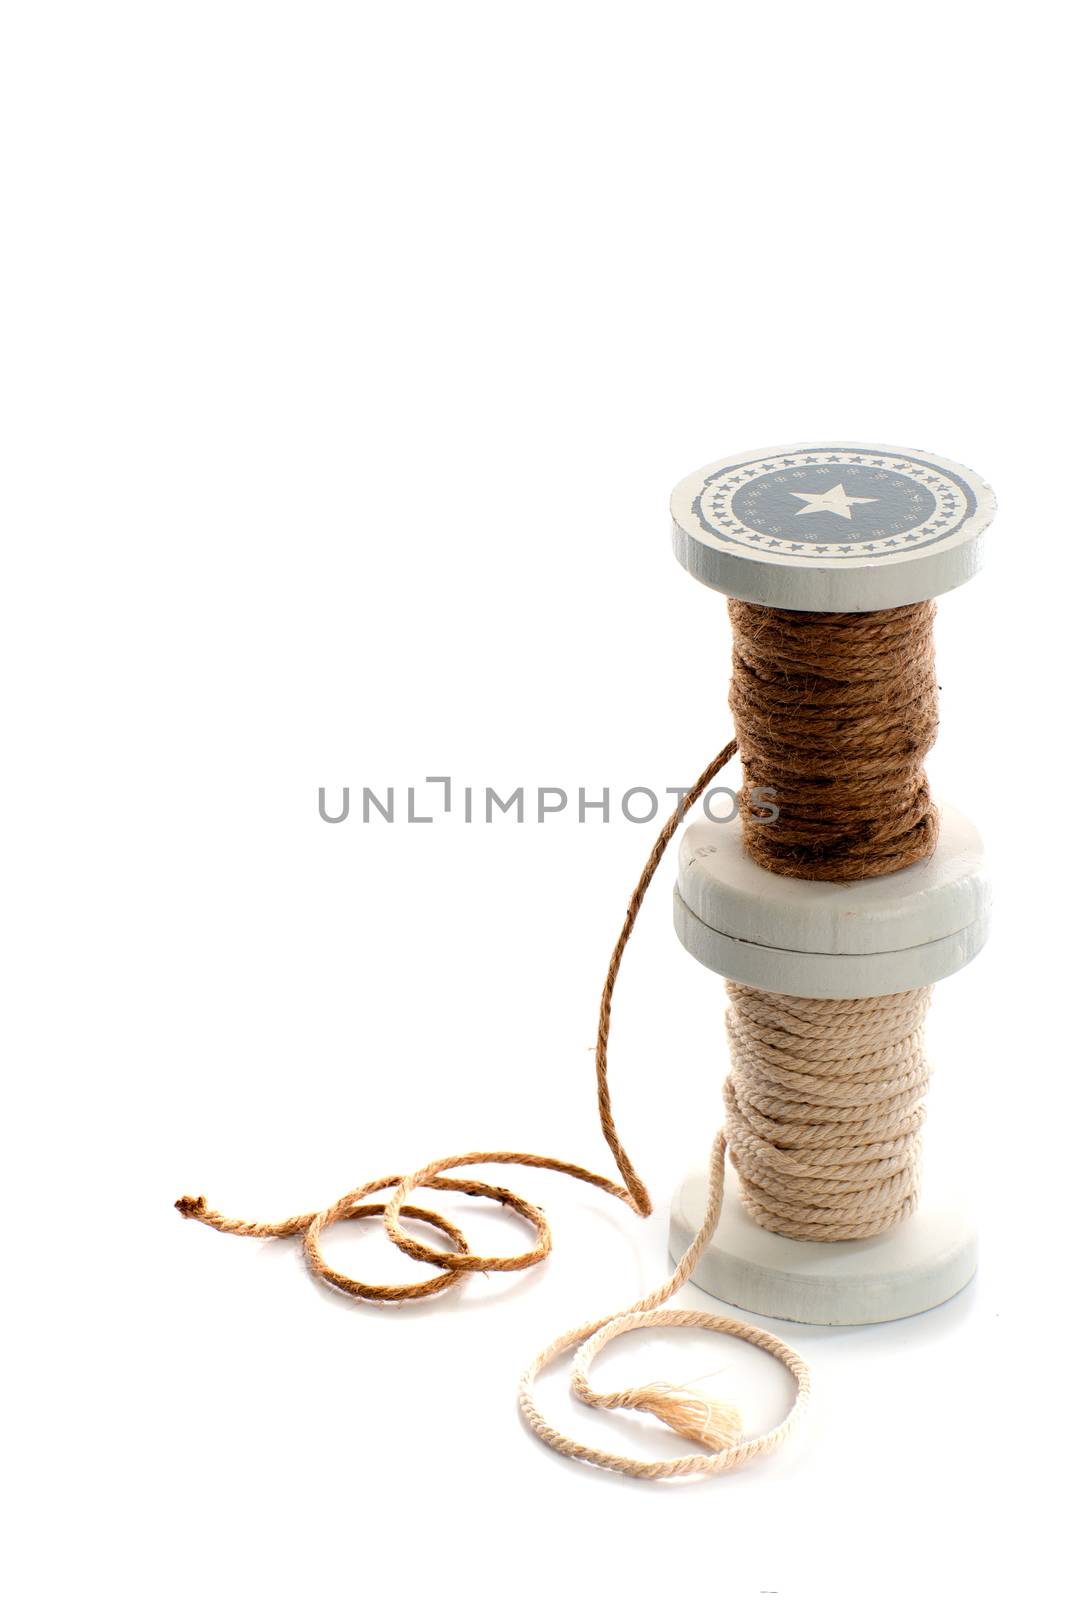 spool of rope by Gabees